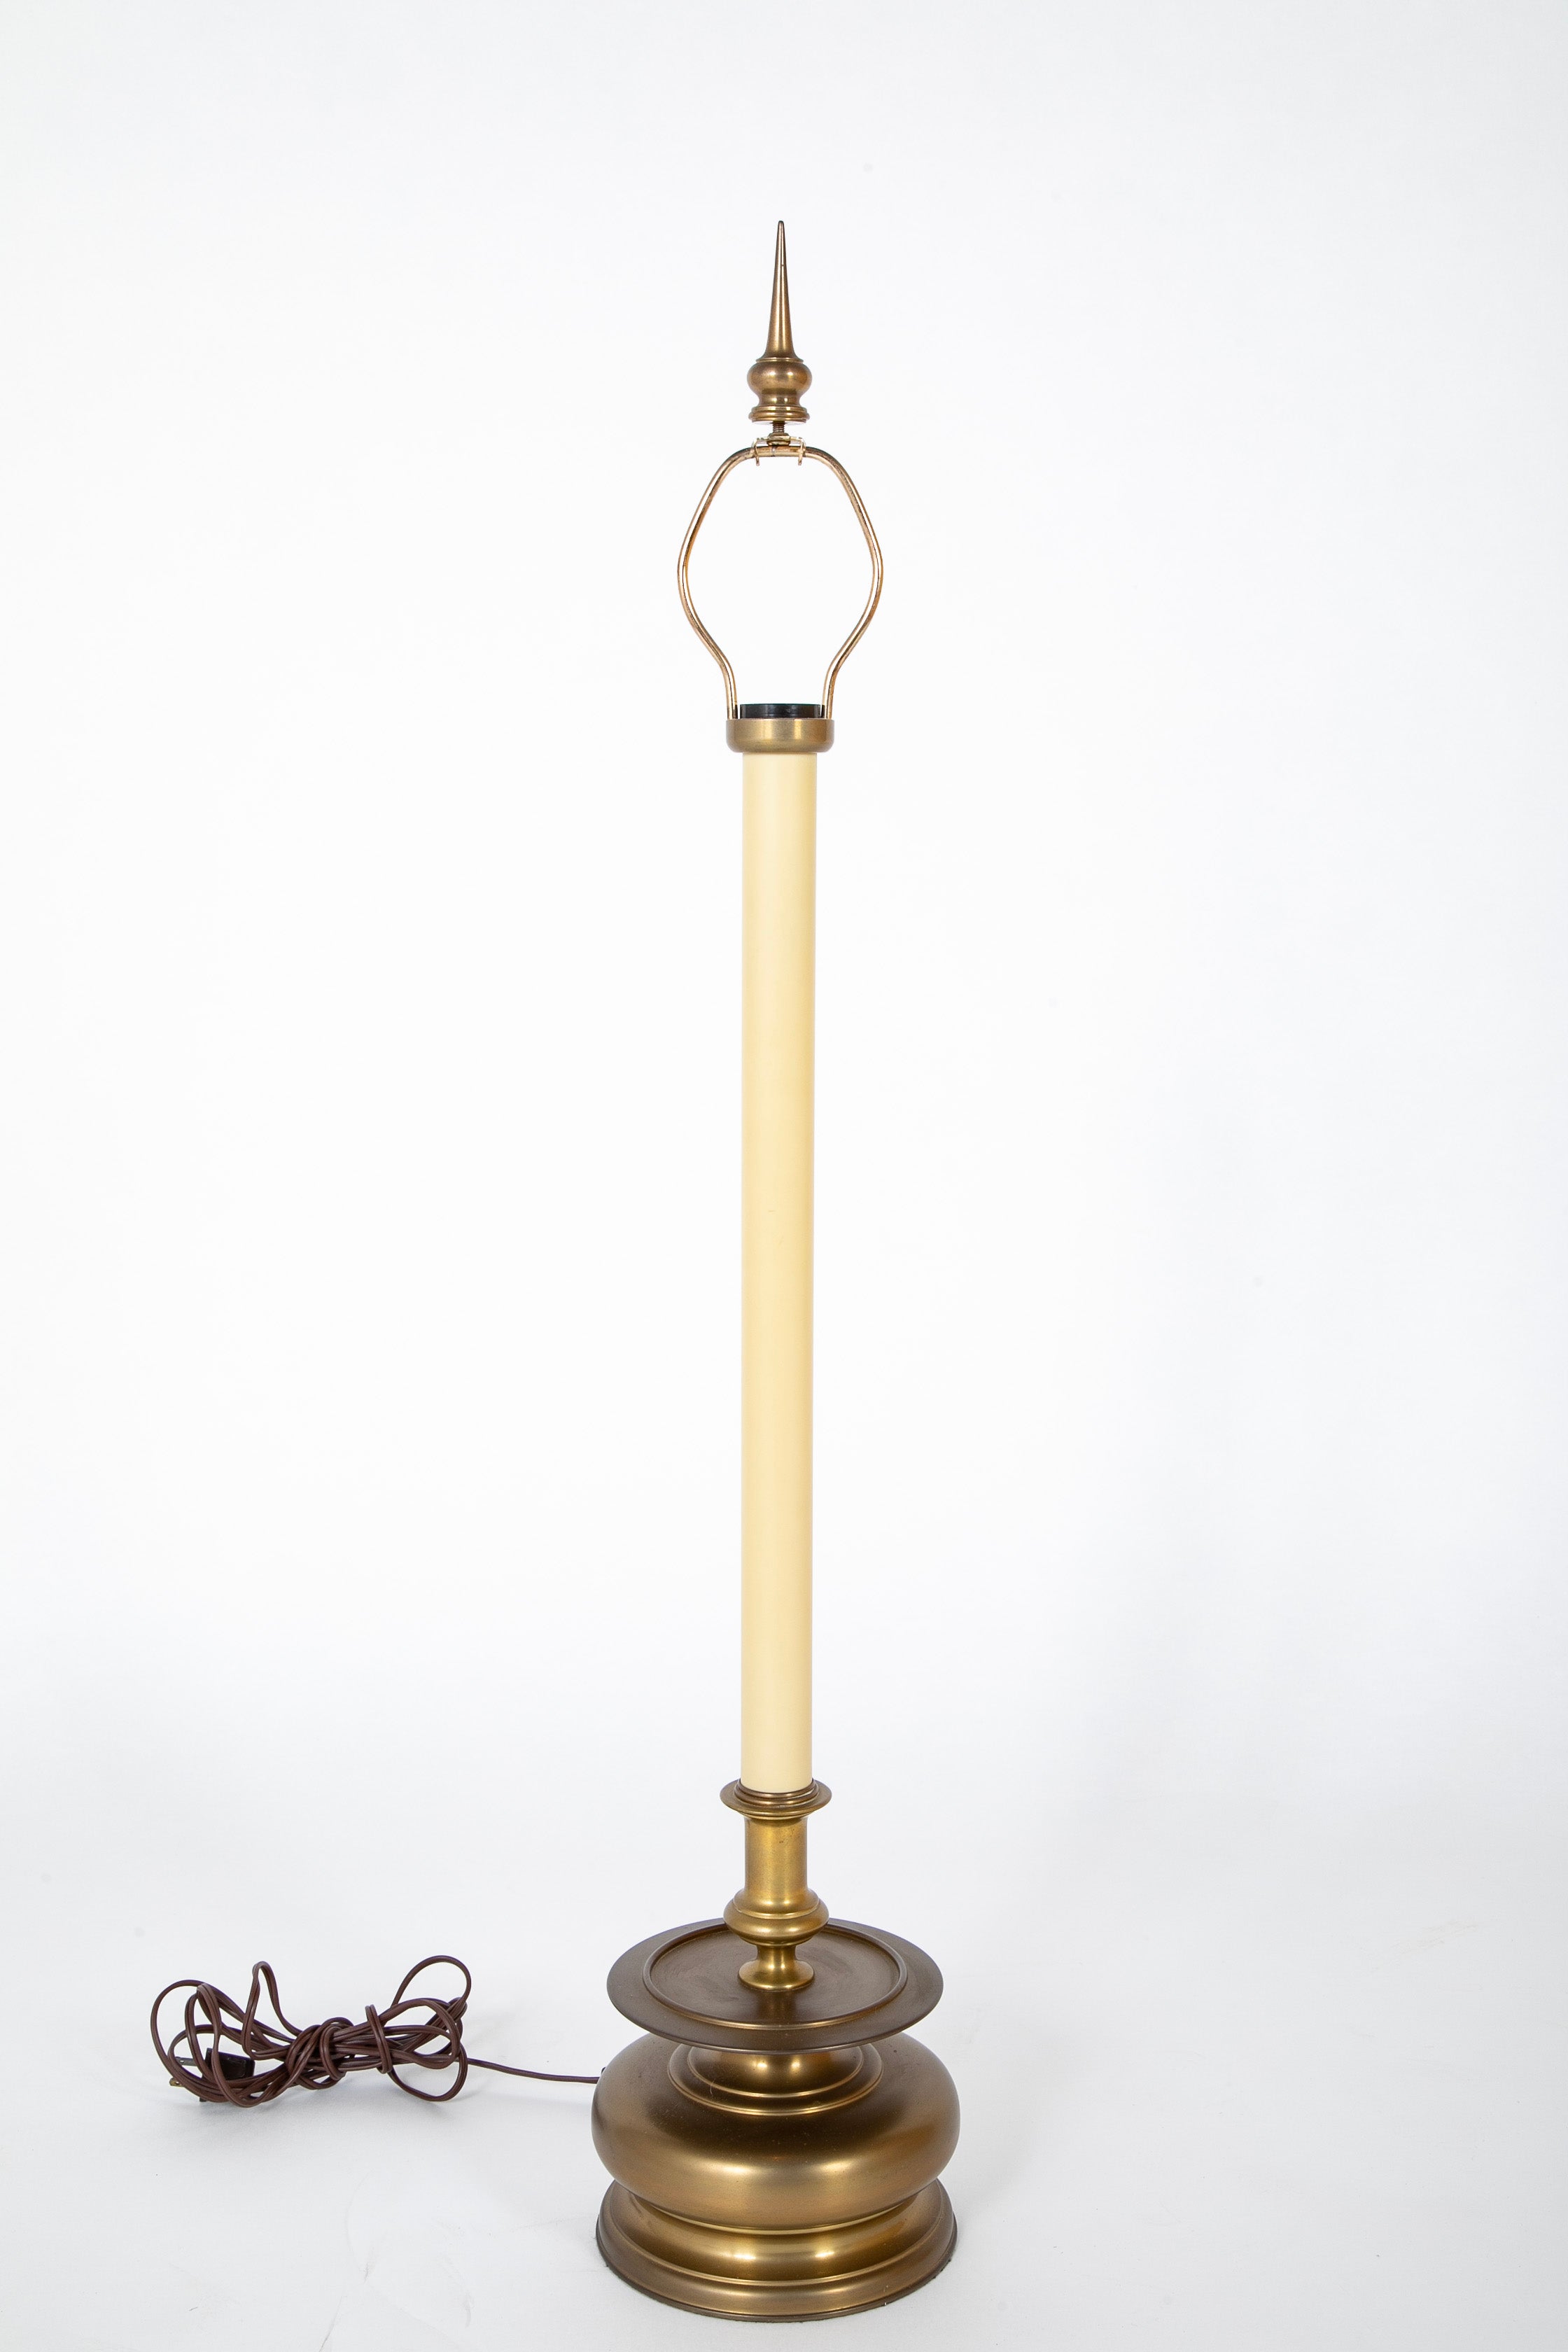 A Pair of Chapman Brass Candlestick Table Lamps